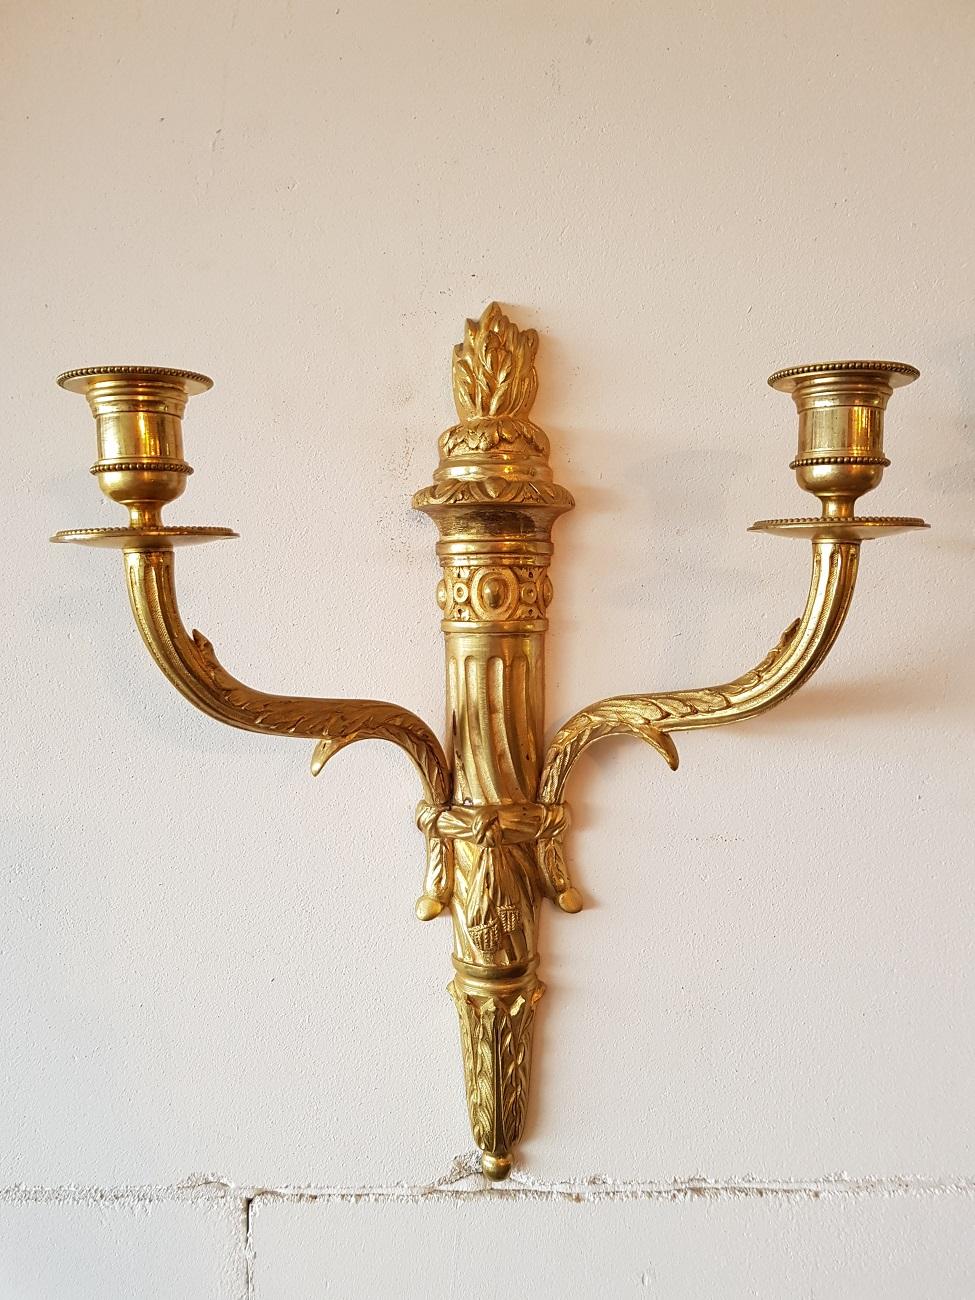 A beautiful pair identical bronze candle sconces in Louis XVI style, both numbered 10302 and the marked with letter F and originates from the 20th century.

The measurements are,
Depth 10.5 cm/ 4.1 inch.
Width 30.5 cm/ 12 inch.
Height 37 cm/